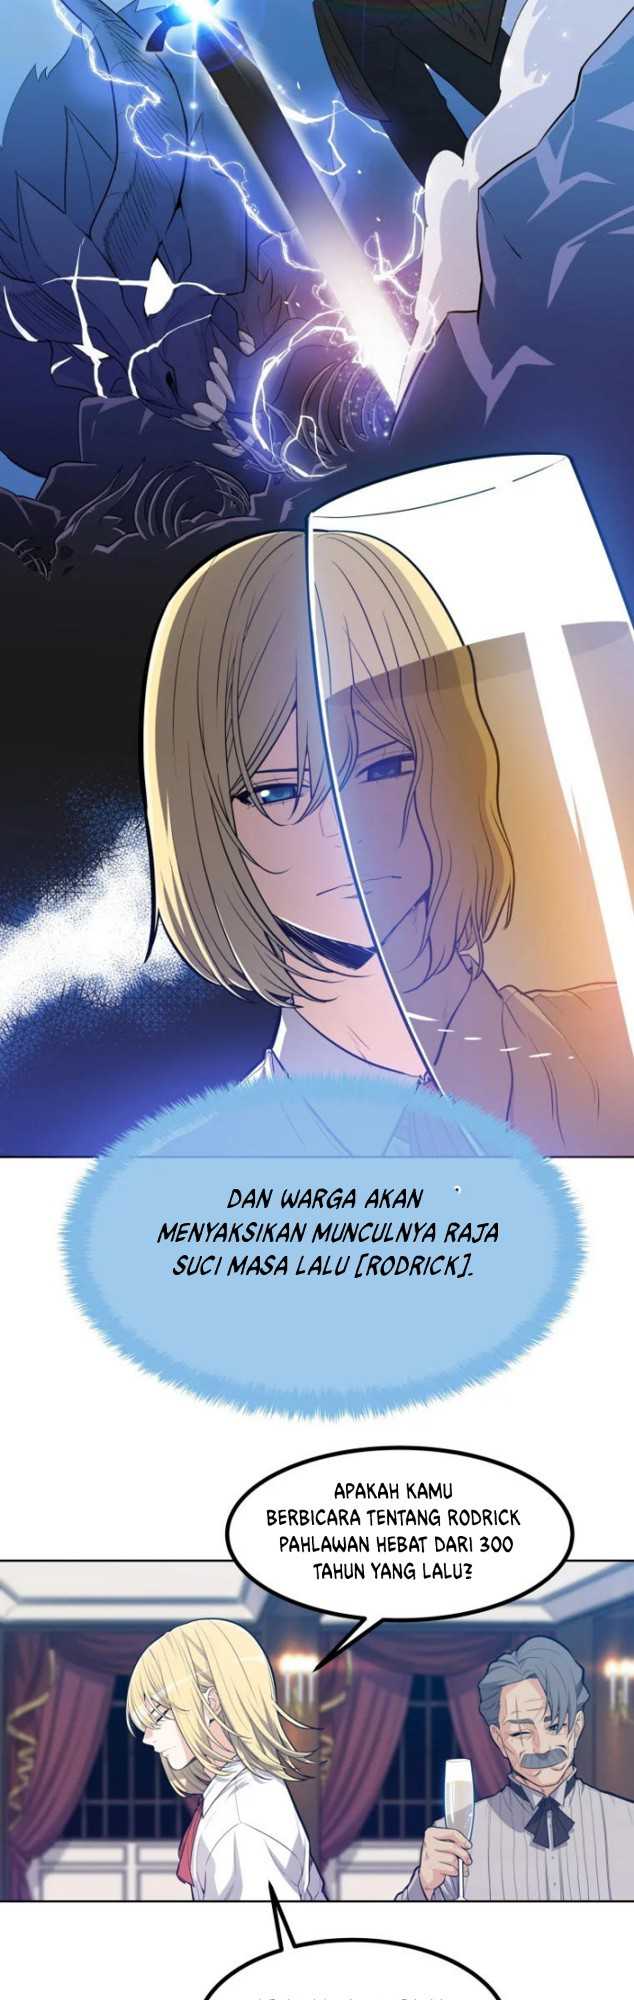 Overpowered Sword Chapter 01